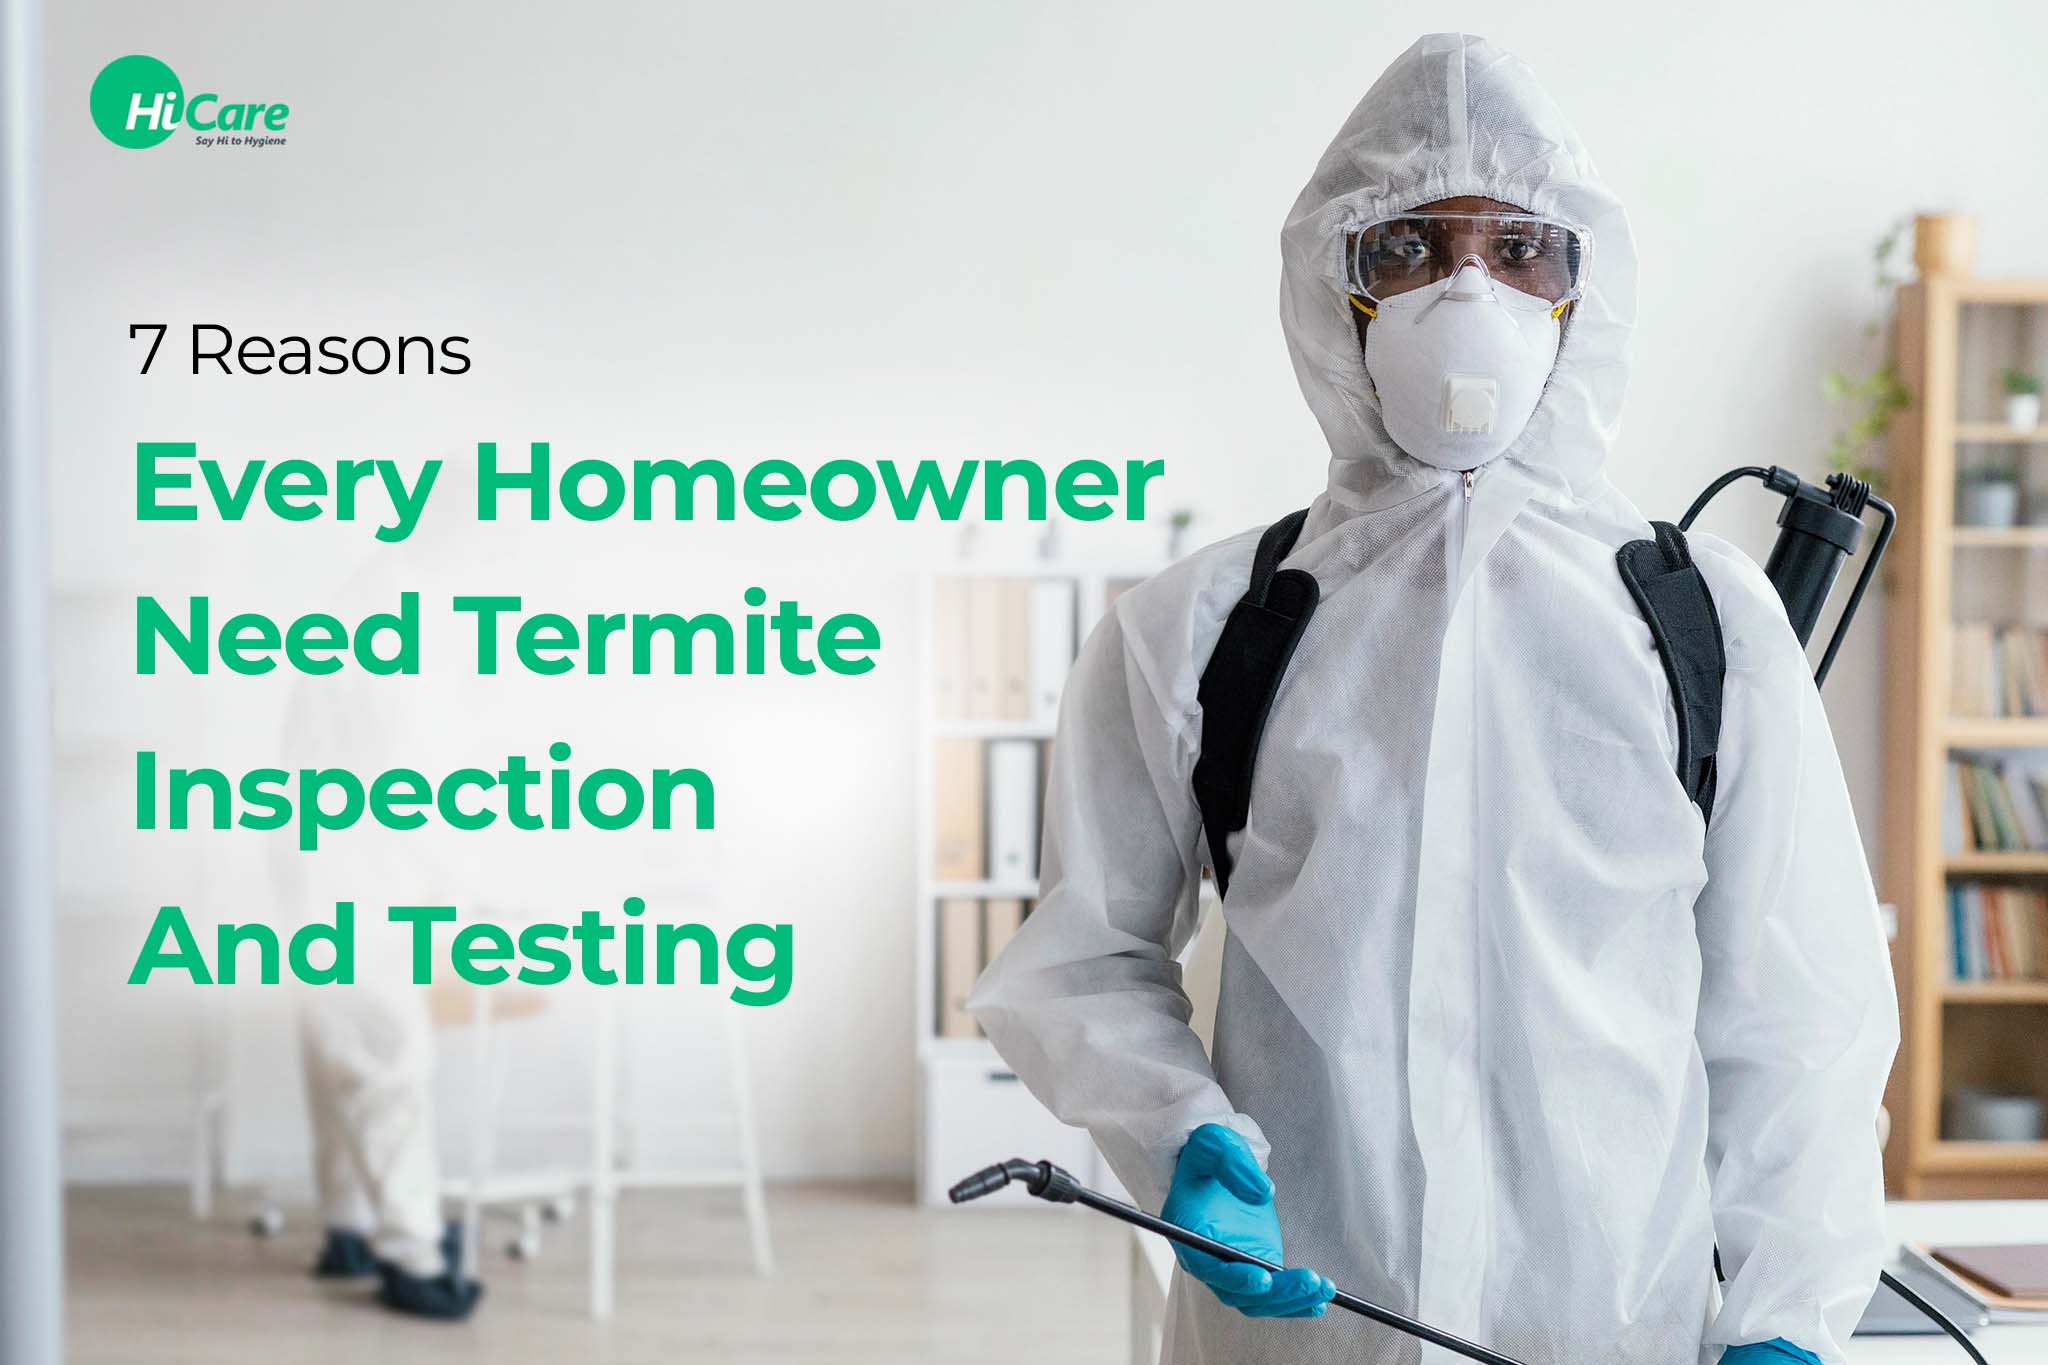 7 Reasons Every Homeowner Needs Termite Inspection And Testing